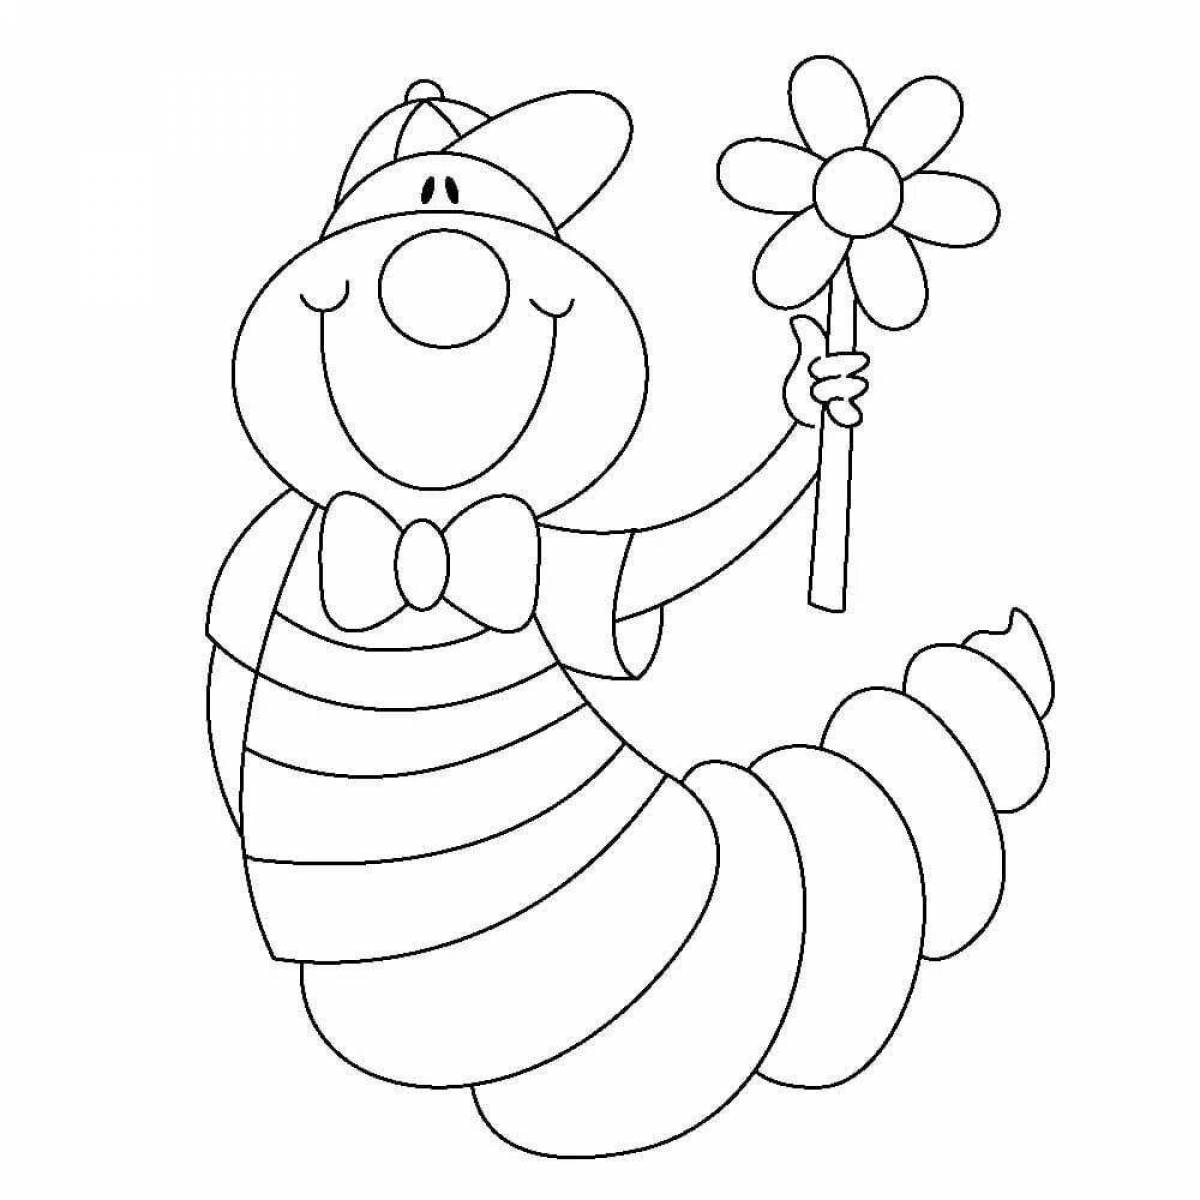 Colorful caterpillar coloring page